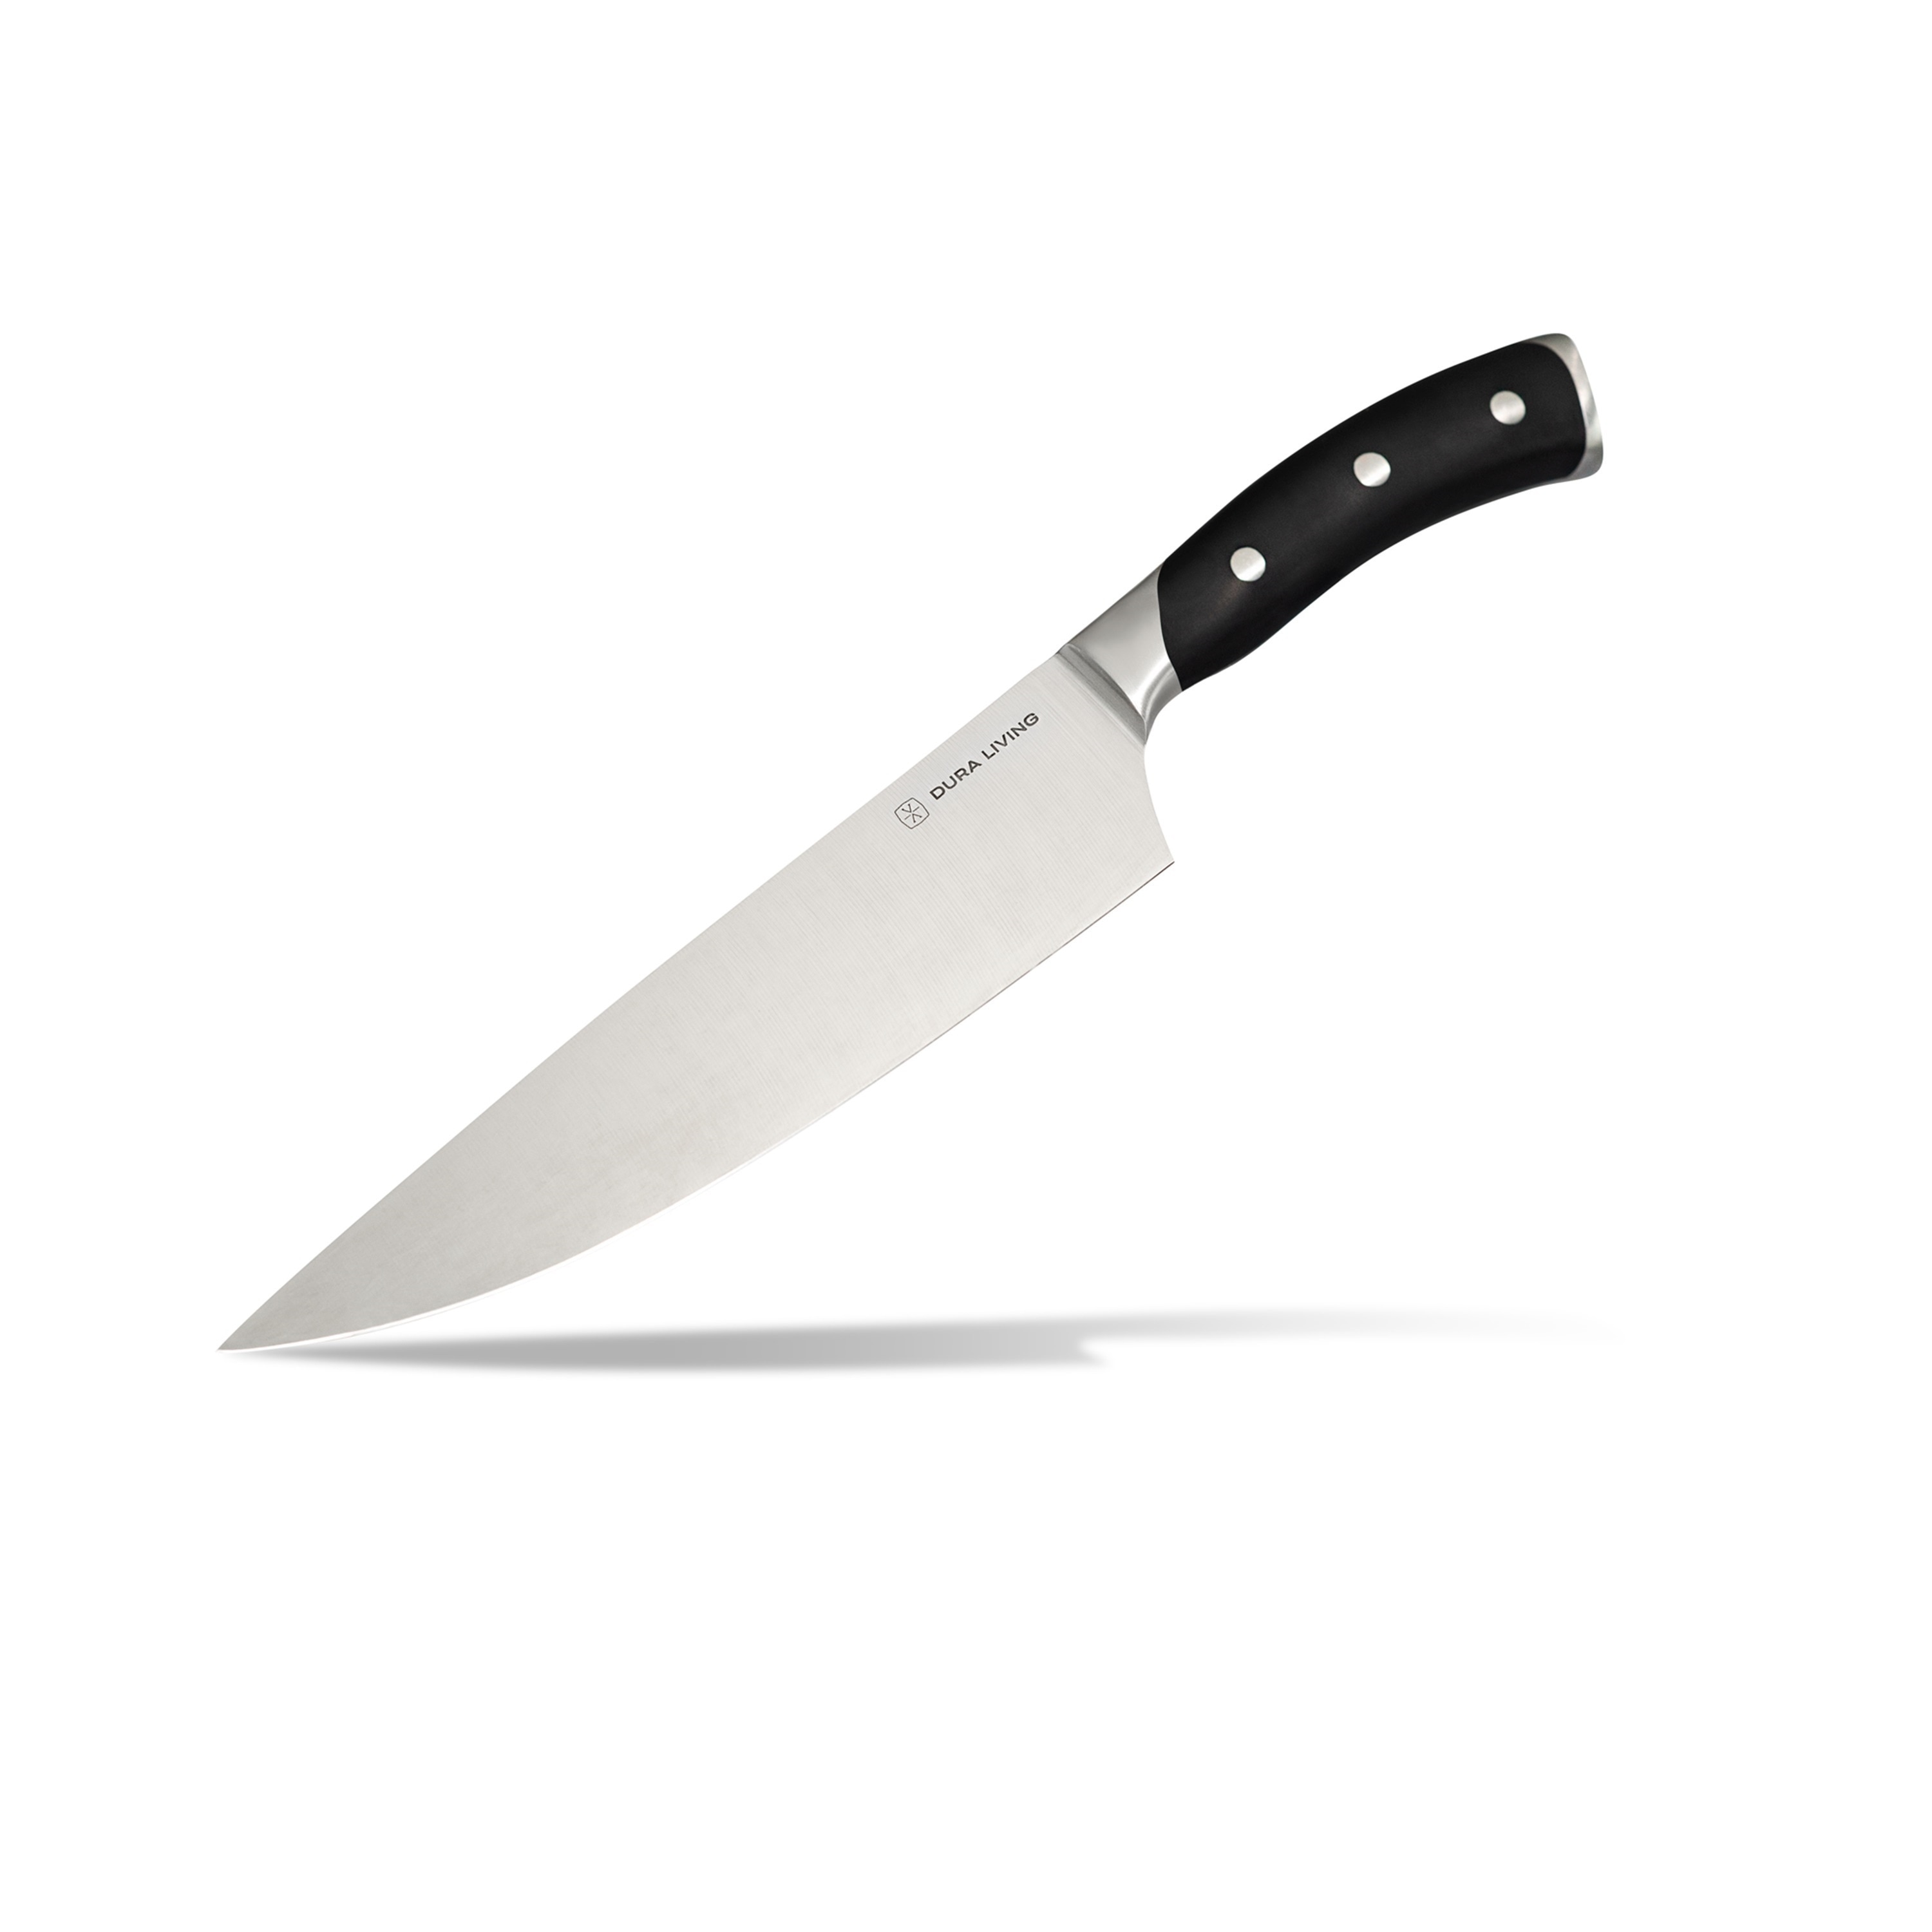 https://ak1.ostkcdn.com/images/products/is/images/direct/cf4e103d8f0924767202009a7f35a52b0d4bd046/Dura-Living-Elite-8-inch-Chef-Knife---Forged-High-Carbon-German-Stainless-Steel-Blade%2C-Black.jpg